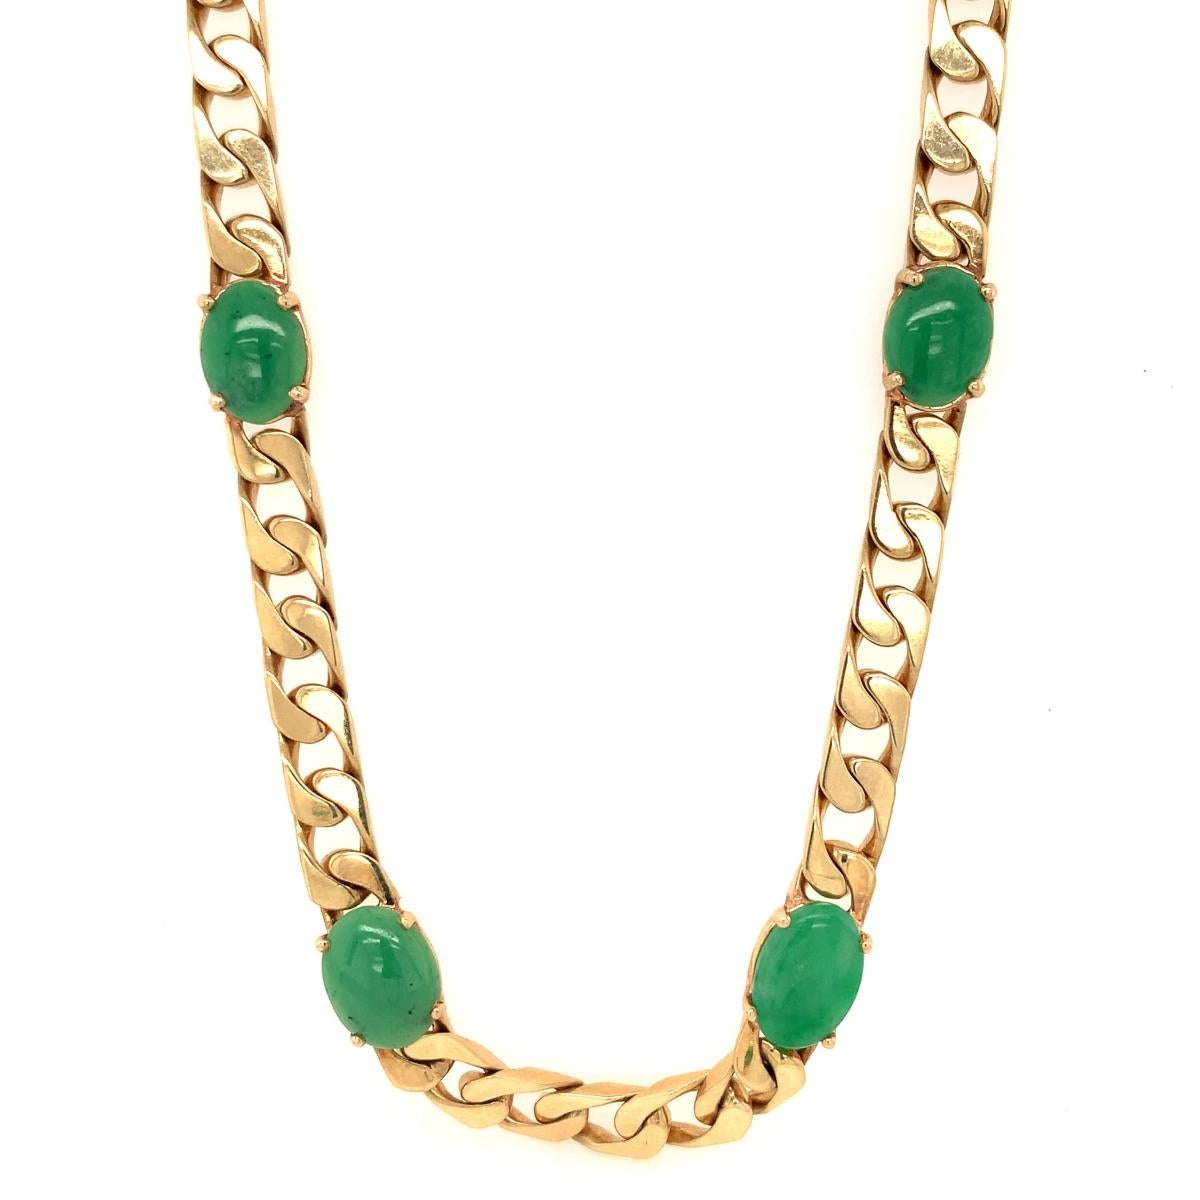 Cabochon Green Jade 14K Yellow Gold Necklace, circa 1970s For Sale